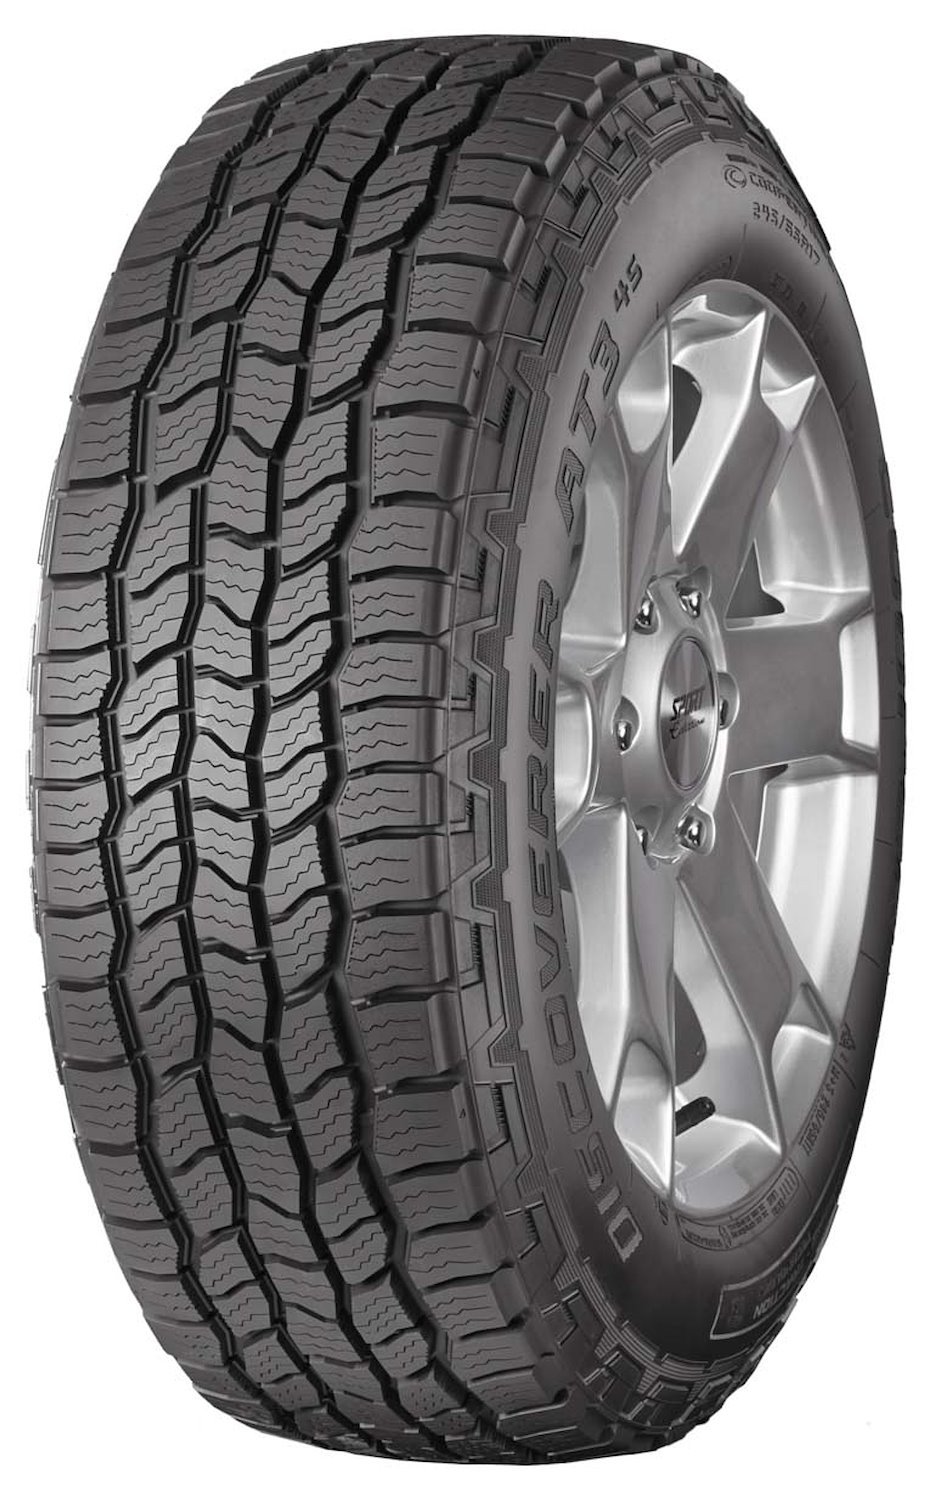 Discoverer AT3 4S All-Terrain Tire, 225/70R15